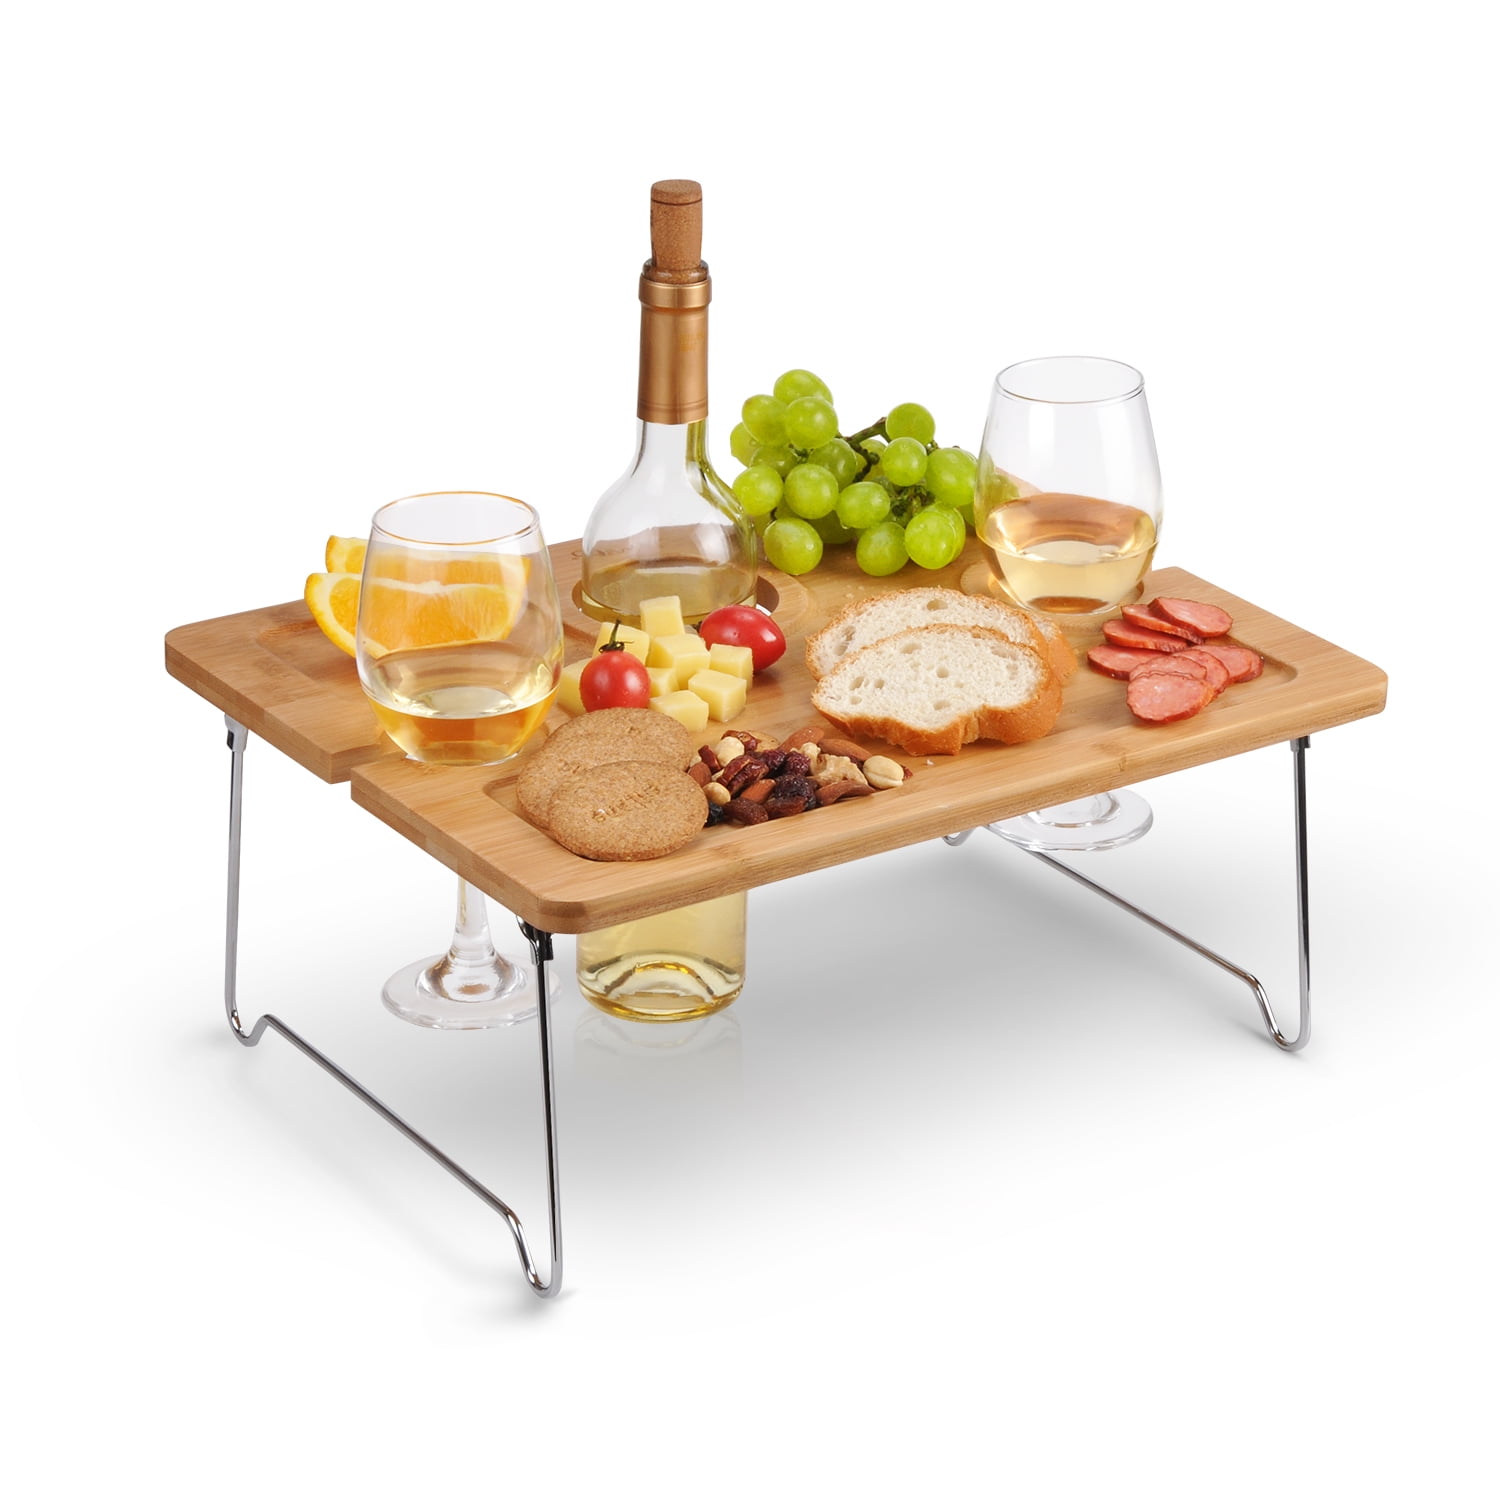 Backyard Suitable for Outdoors Outdoor Folding Wine Table,Portable Picnic Table,Portable Outdoor Wine Table Wood Wine Glasses & Bottle Holder Beach,Travel Garden Snack and Cheese Holder Tray 